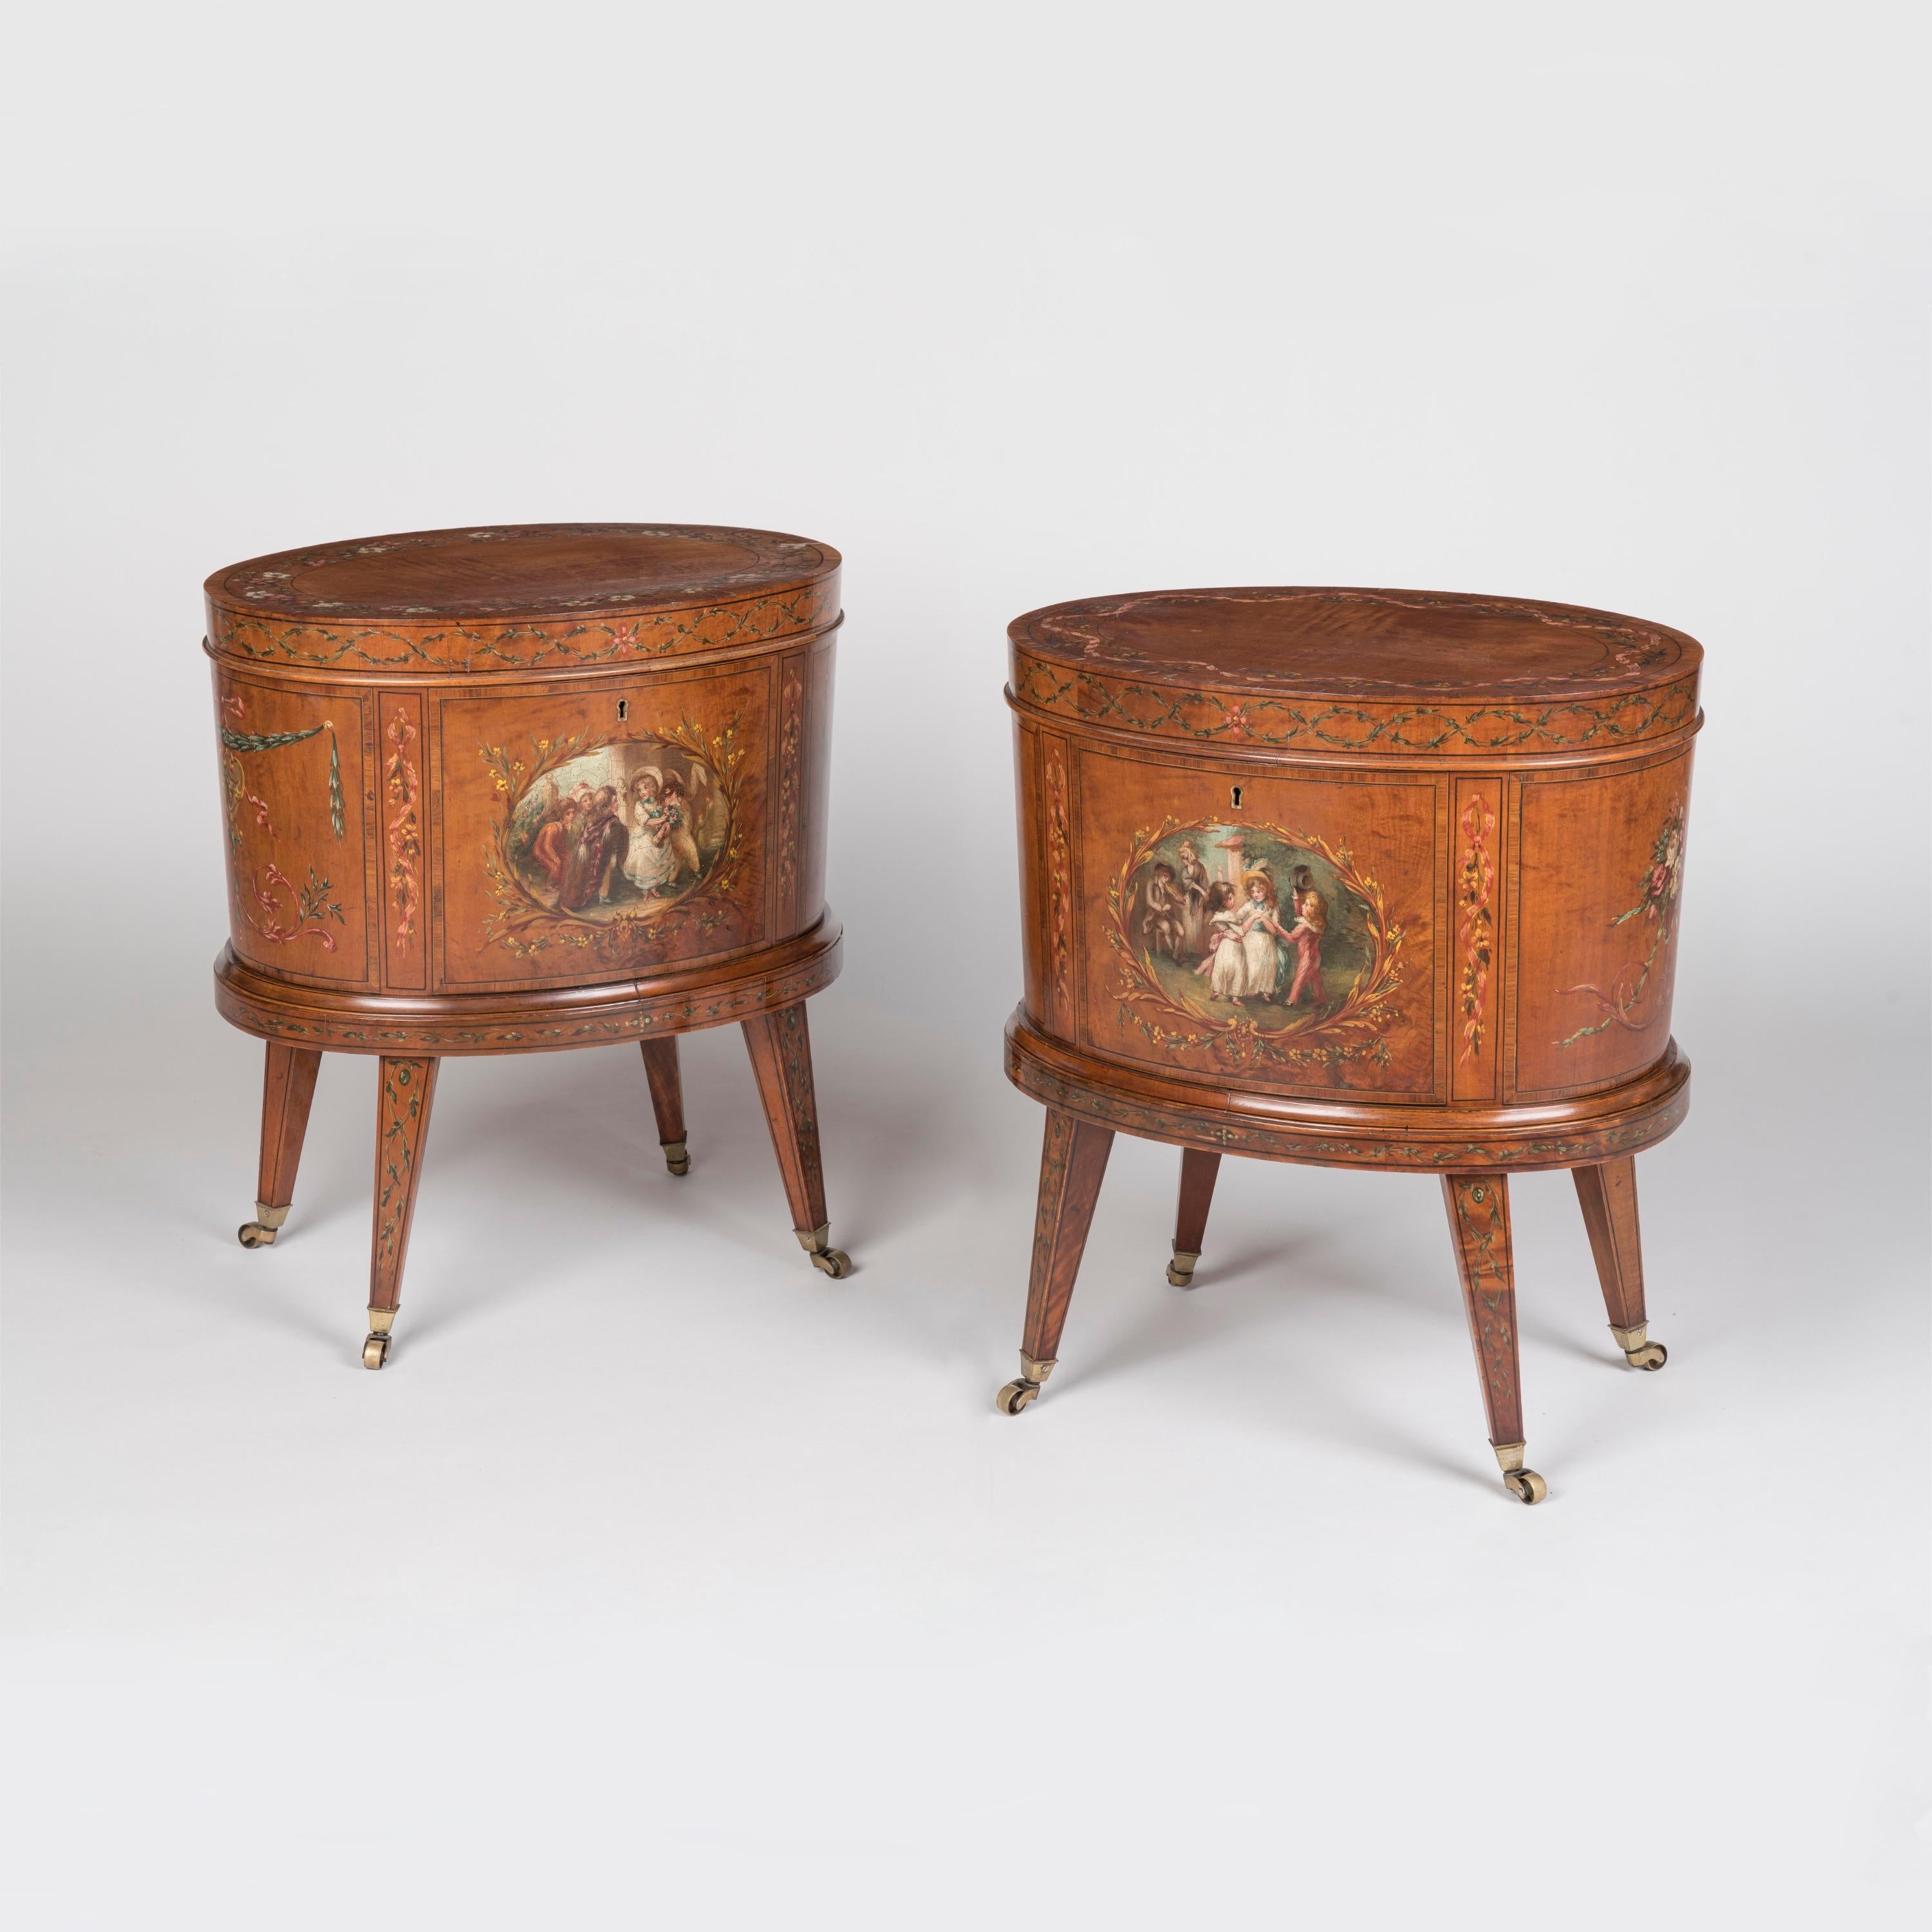 A Rare Pair of Cellarettes 
in the Adam Manner

Of elliptical form, constructed in Satinwood, hand painted with floral attributes, and 'Angelica Kauffman' style cartouches of le beau monde, in polychromes; rising from castor shod tapering and